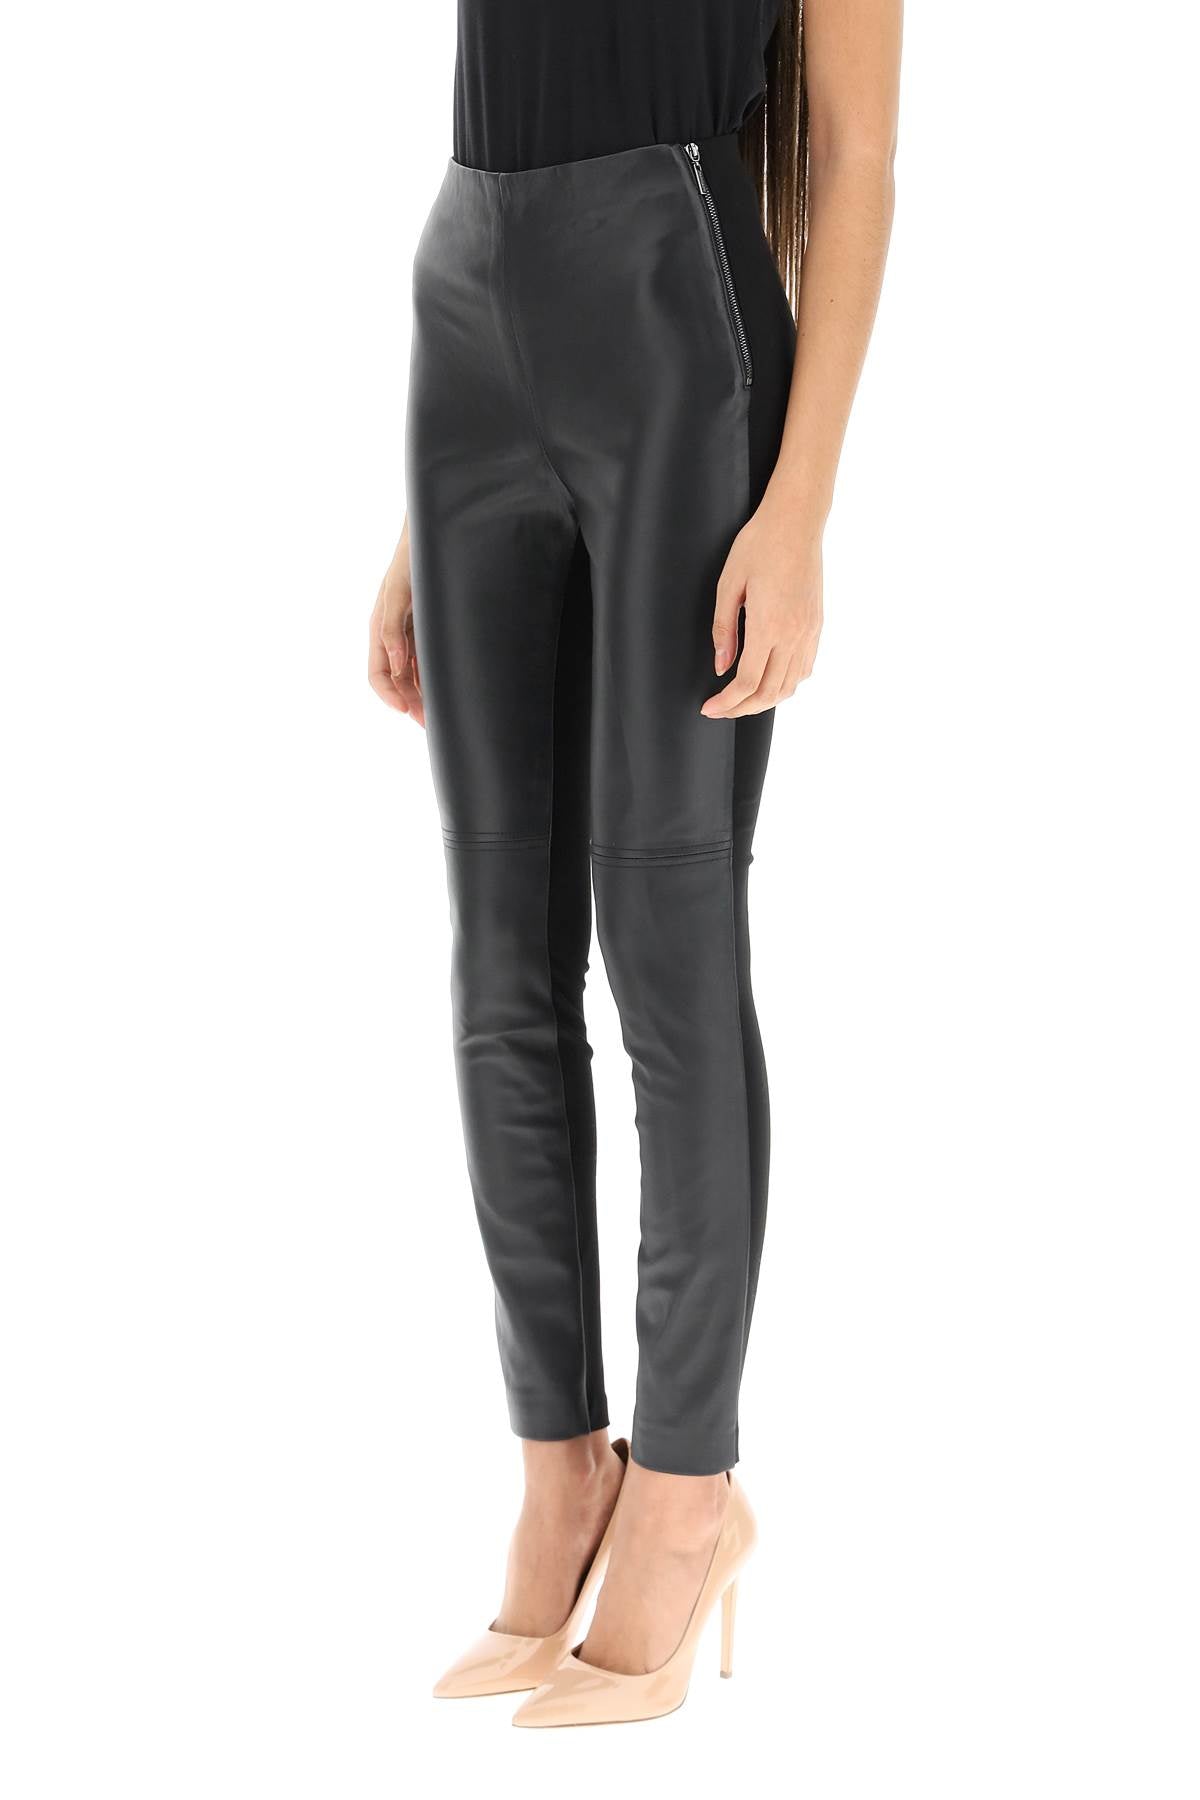 Marciano By Guess Marciano by guess leather and jersey leggings